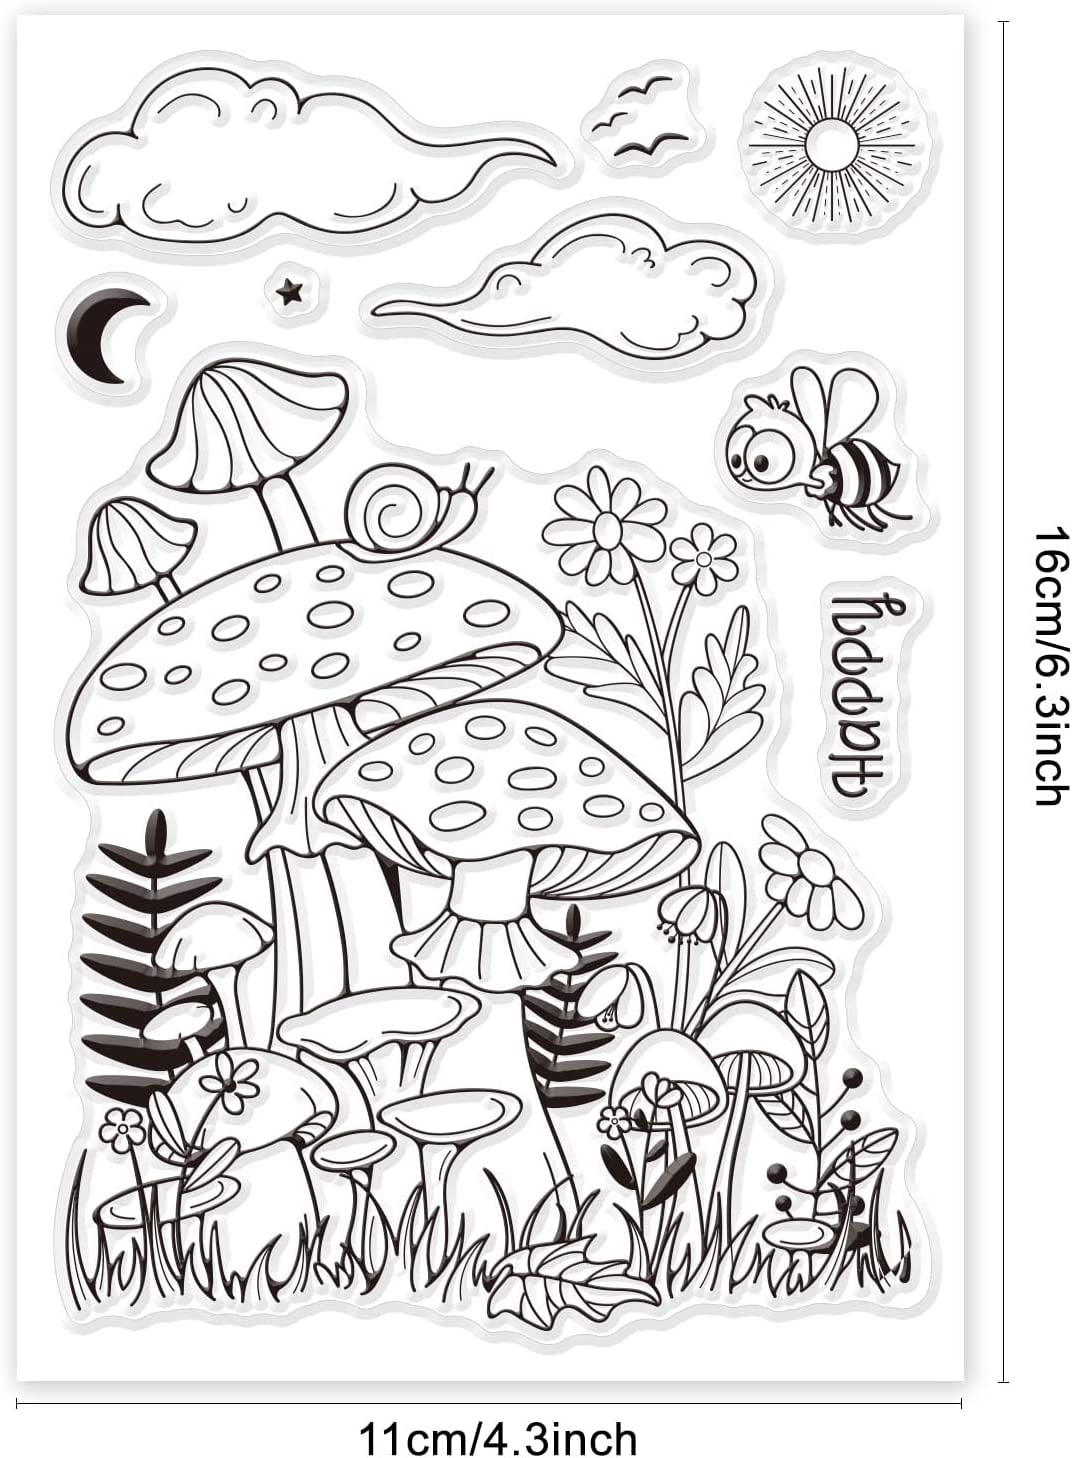 Mix and match cover your mess journaling stickers - Adult coloring jou –  Stationery Wonderland